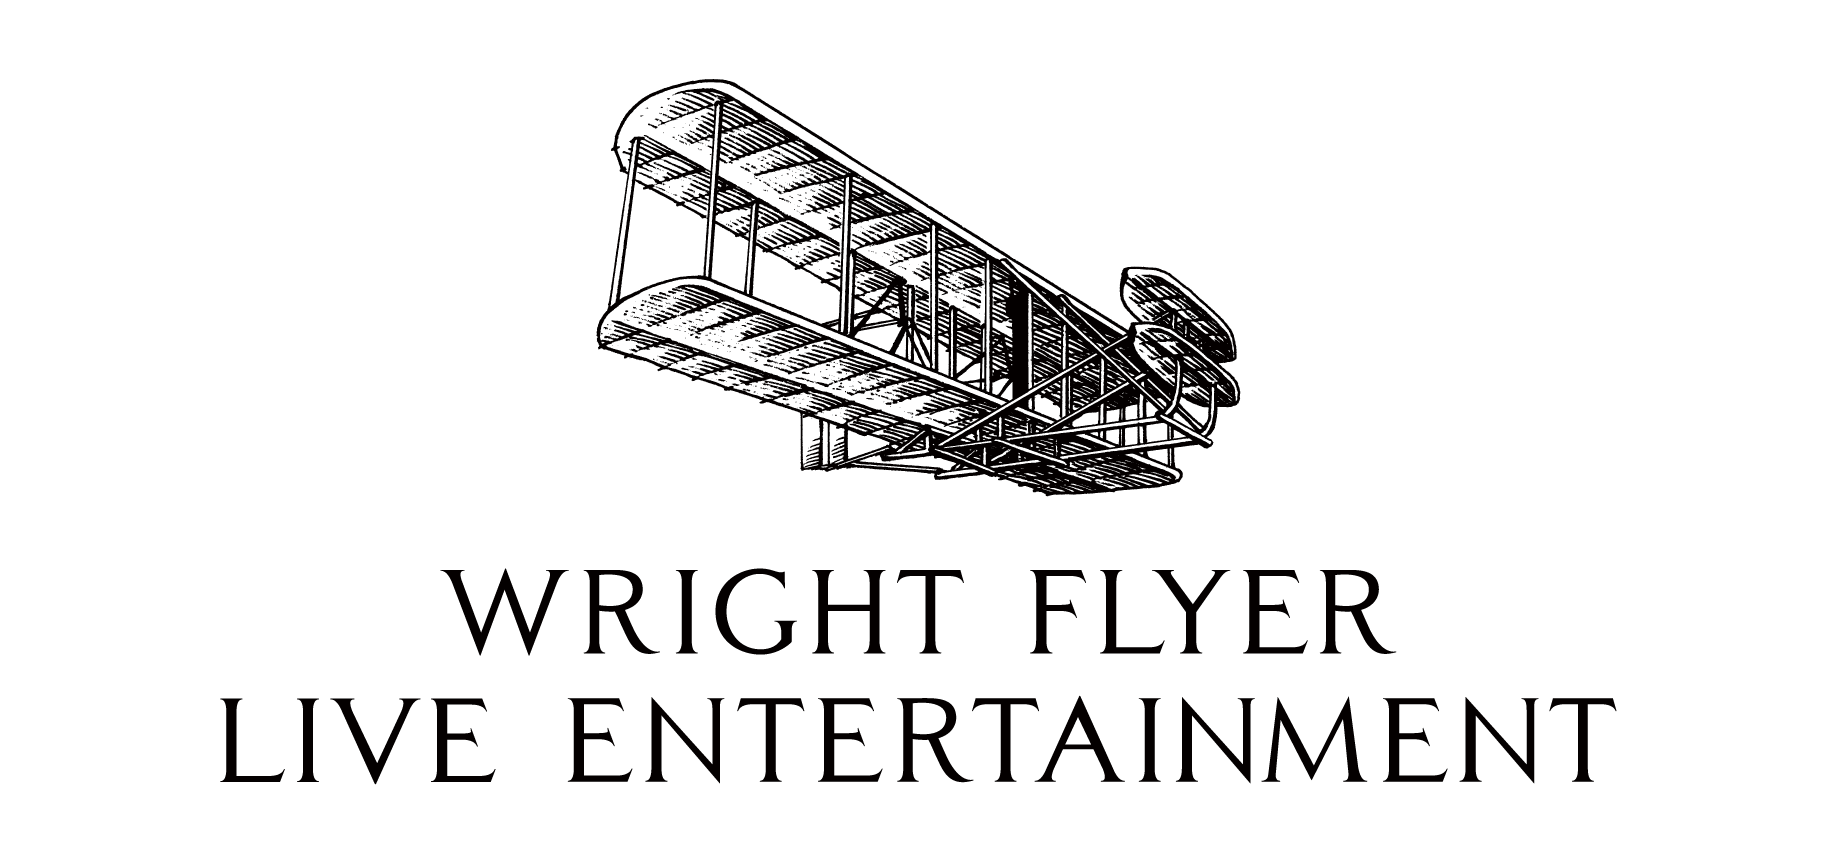 WRIGHT FLYER